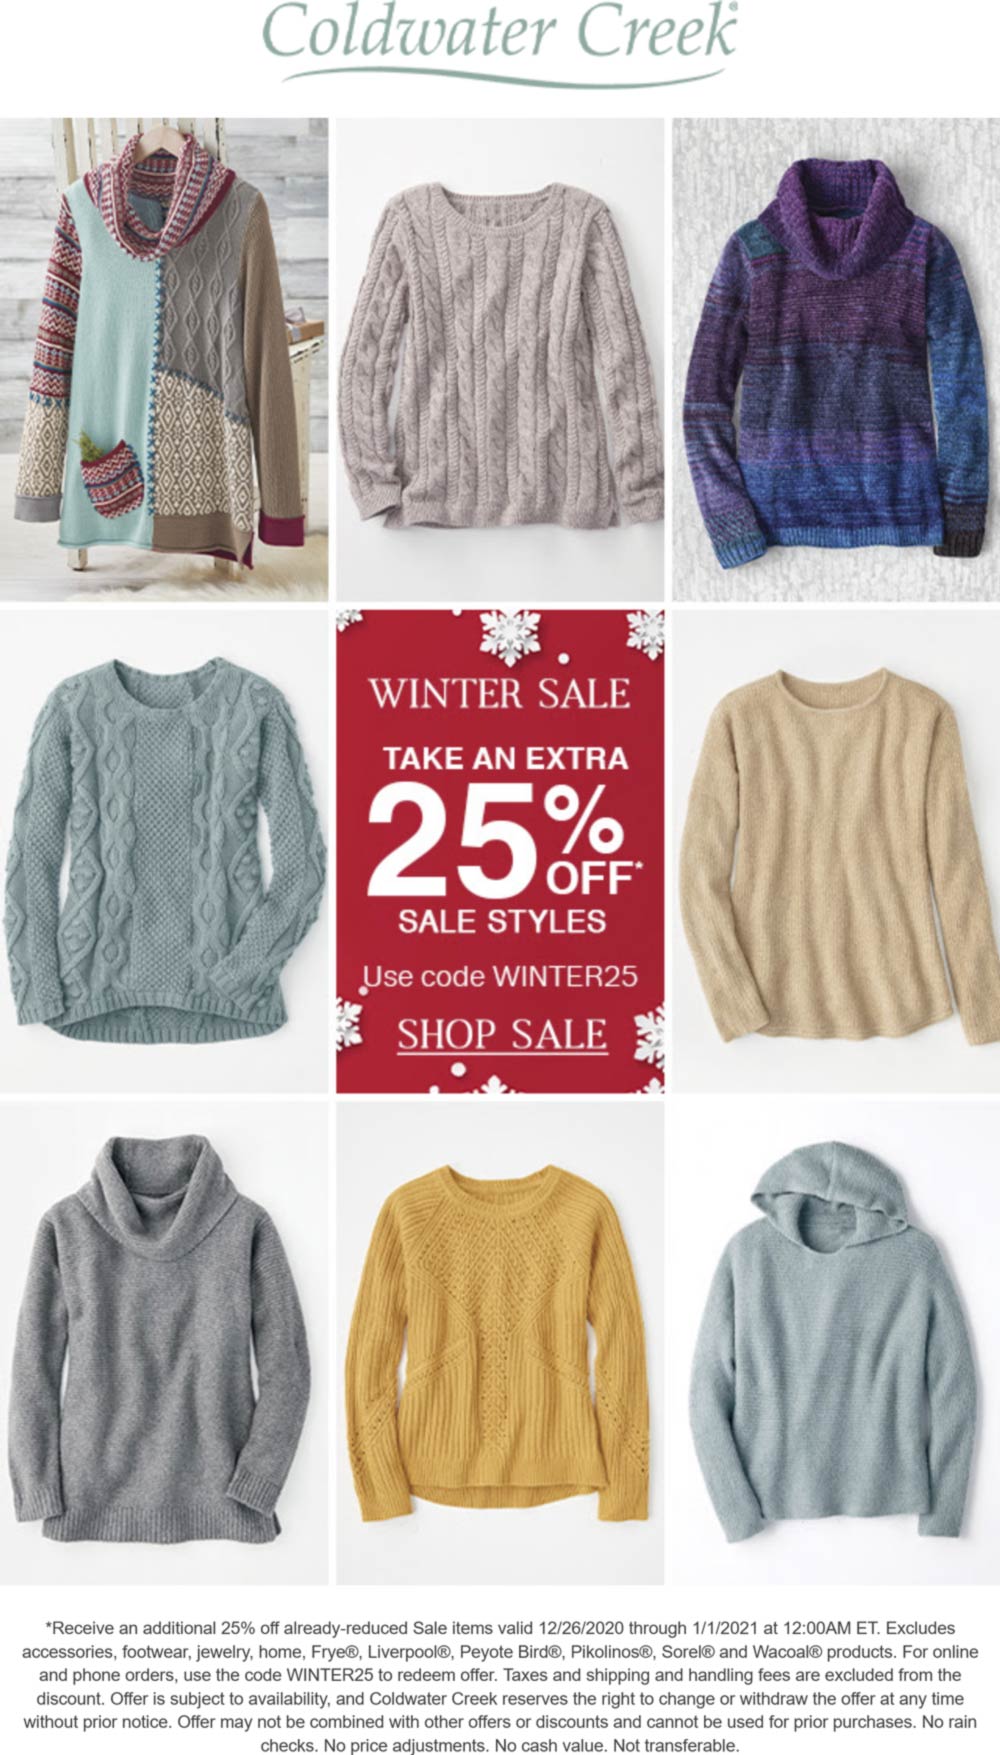 Coldwater Creek stores Coupon  Extra 25% off sale items at Coldwater Creek via promo code WINTER25 #coldwatercreek 